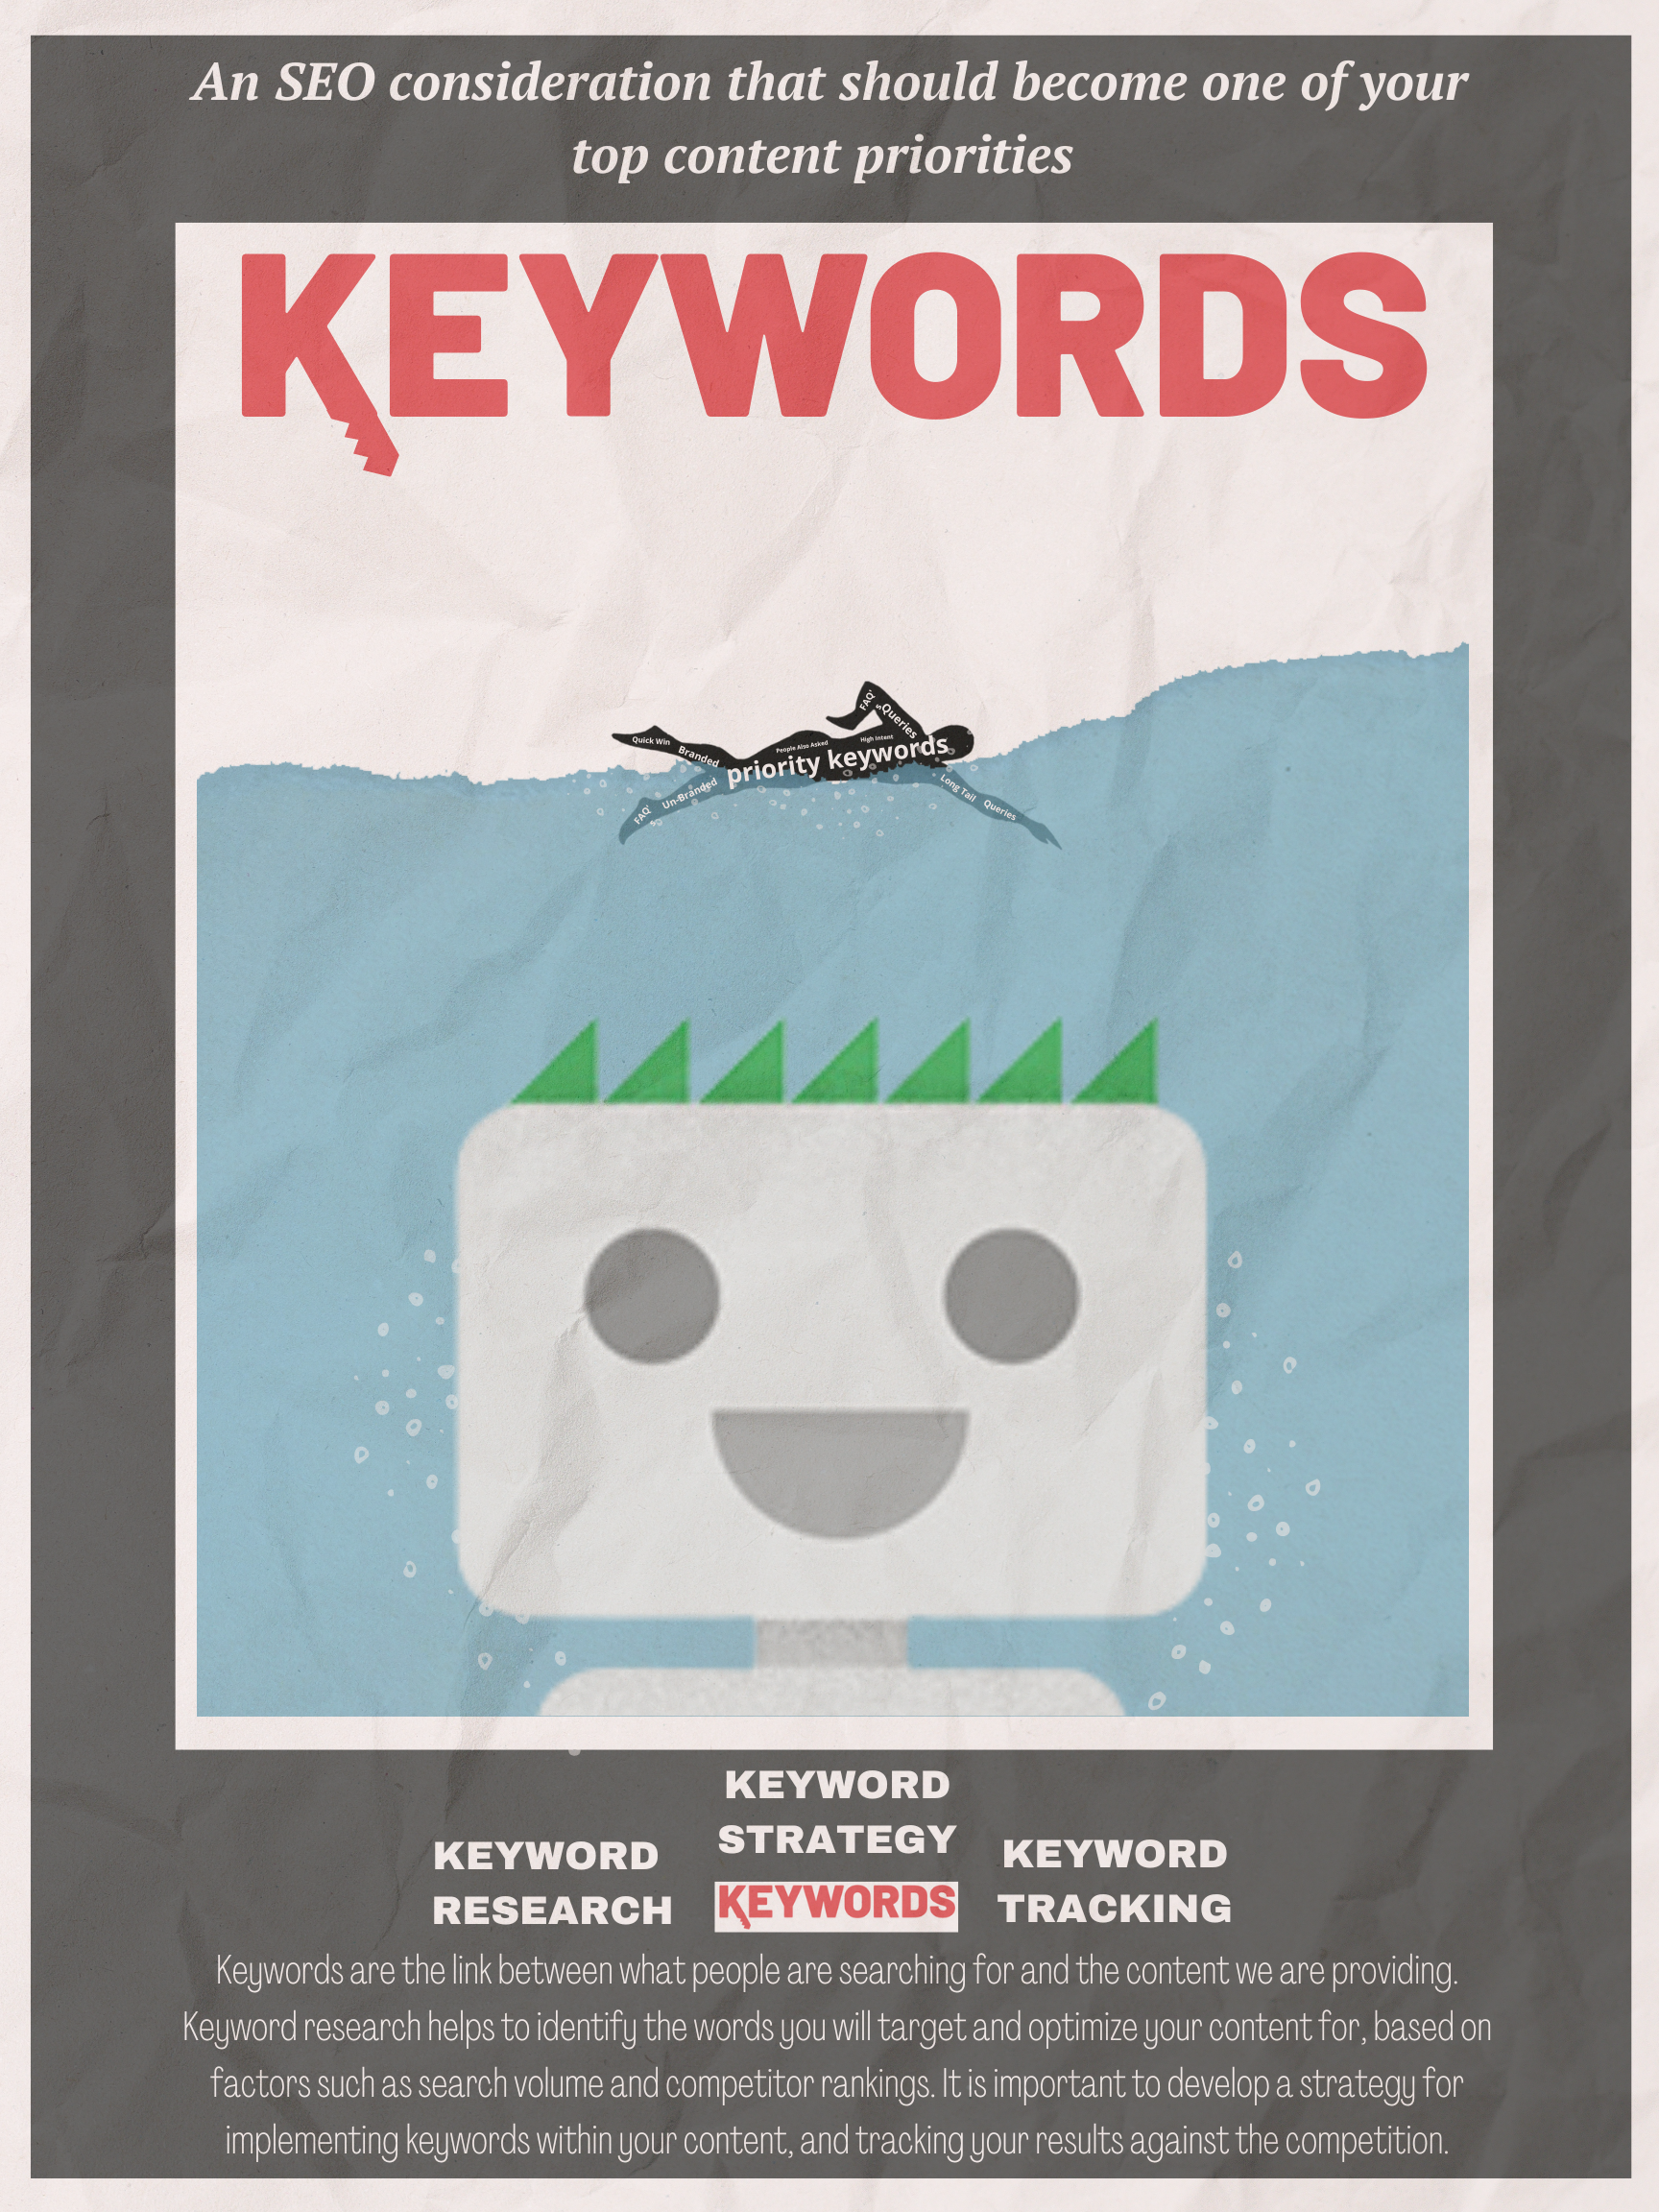 KEYWORDS appears in red above a scene where a silhouetted person is unwittingly swimming in water. The silhouette is filled with search-related words such as "priority keywords", "branded", and "queries". A giant robot emerges from the depth of the water, coming toward the swimmer. Resembles the poster for the movie Jaws.